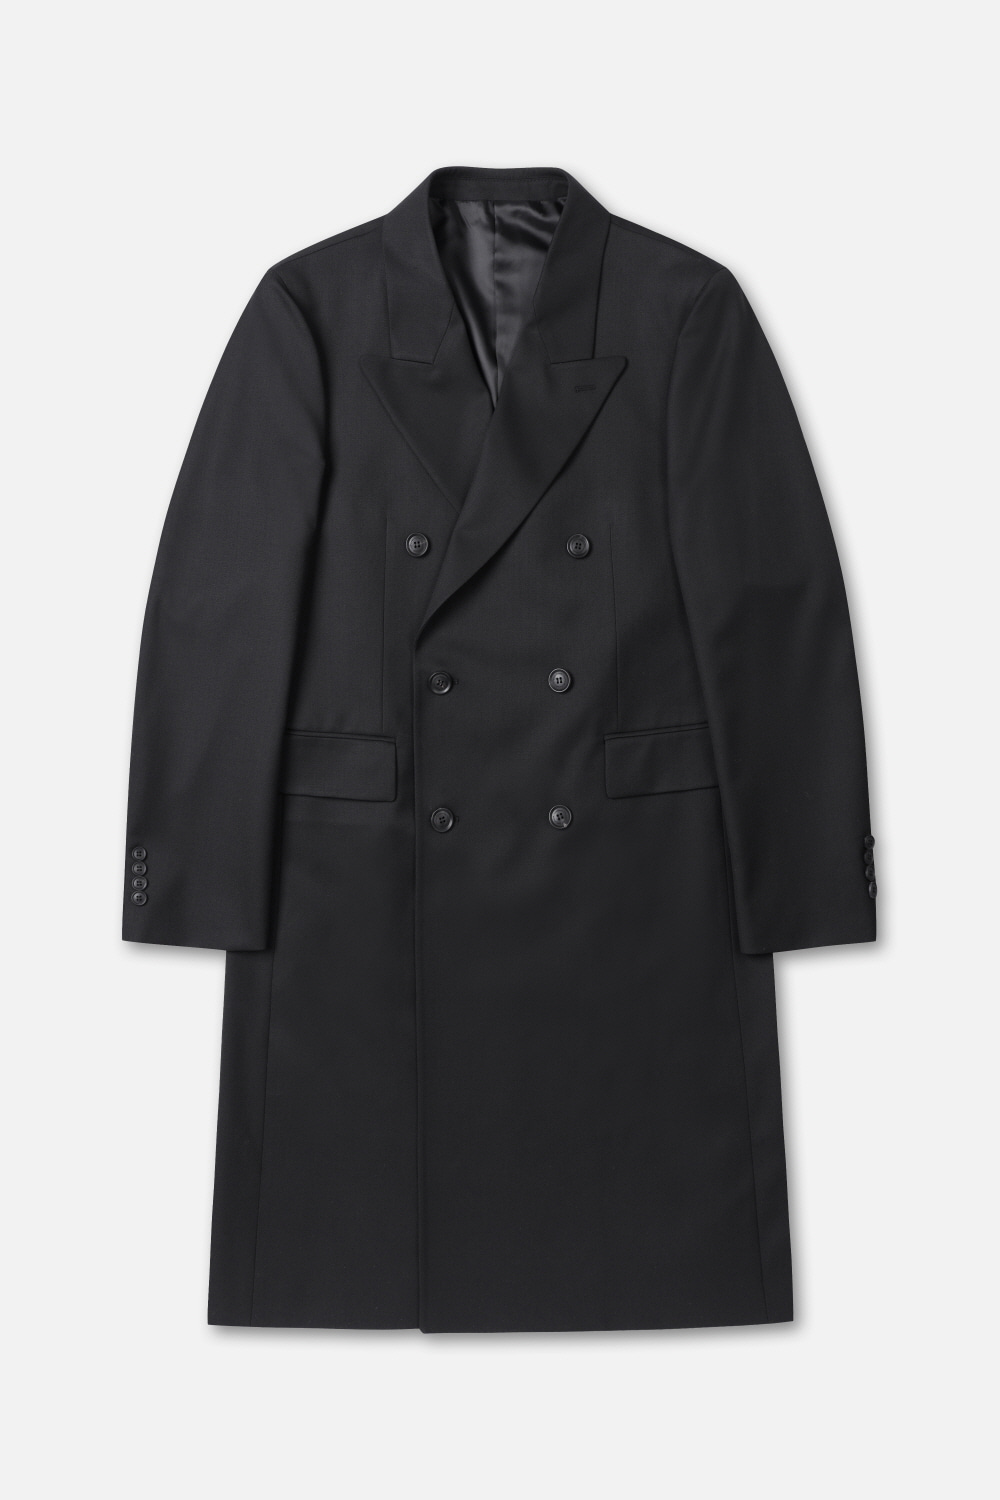 WOOL-BLEND DOUBLE BREASTED COAT